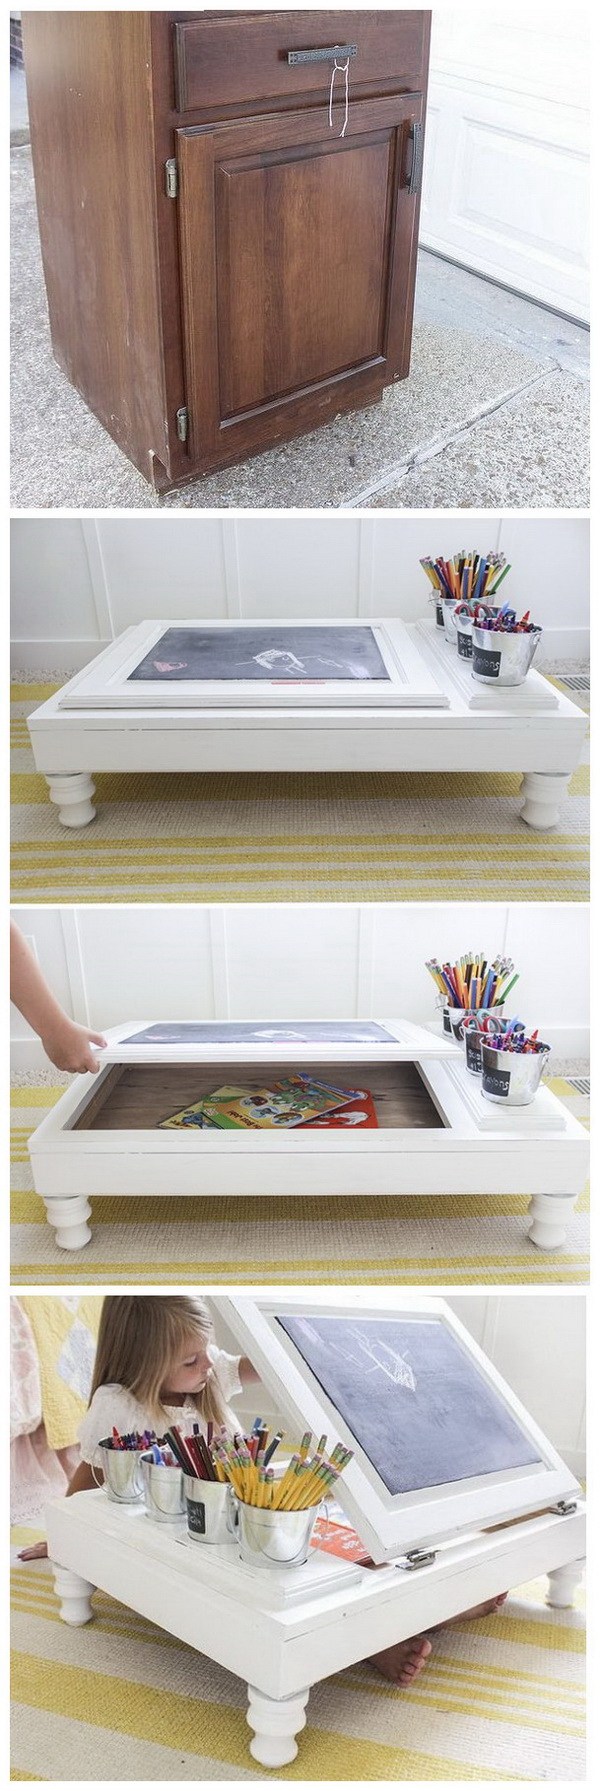 DIY Child’s Desk with Kitchen Cabinet: Never throw away old cabinets next time. Repurpose them into a portable desk for your elementary-aged child with the tutorial here. 